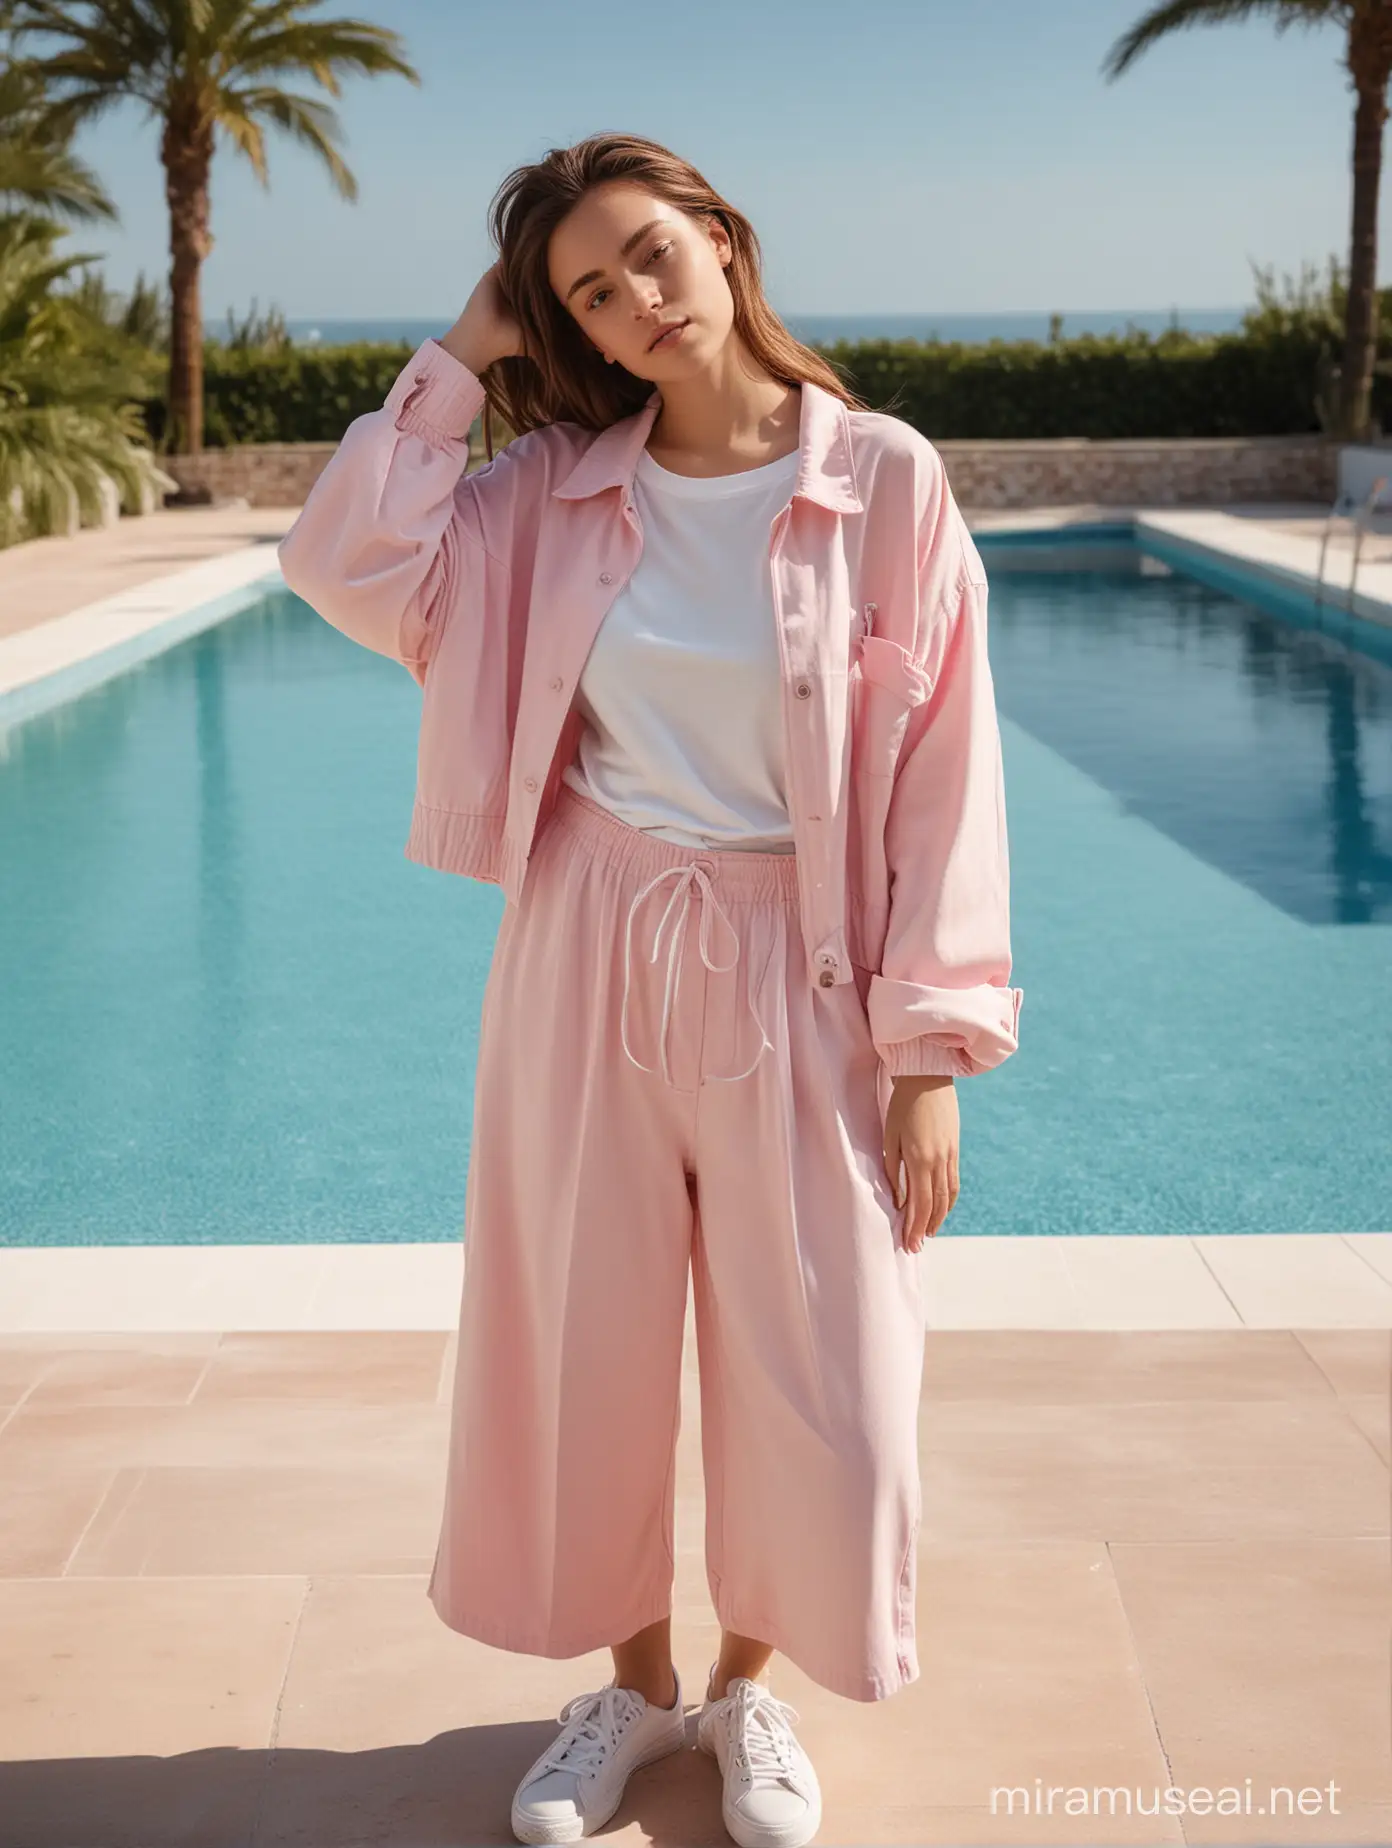 Chic Casual Attire by the Pool in Soft Pastel Hues